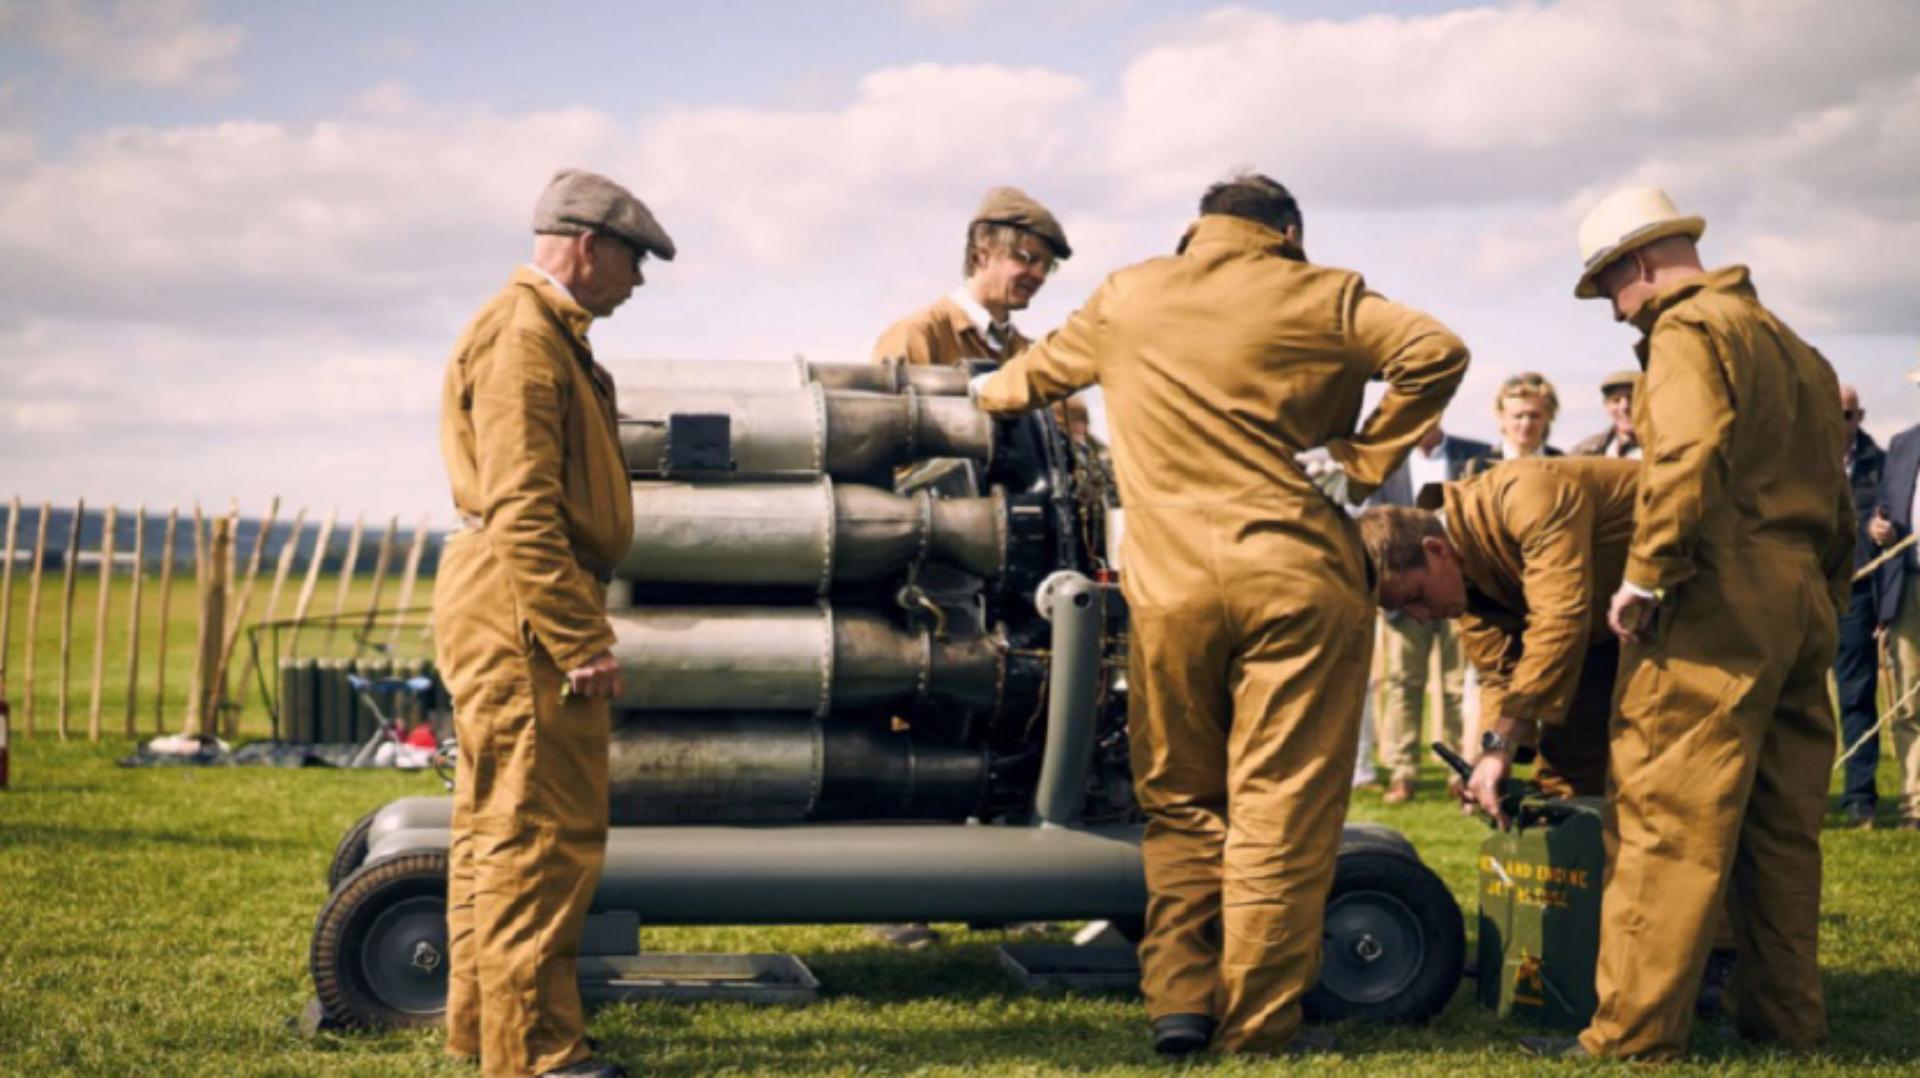 The restored Whittle jet engine on display at the Goodwood Revival event